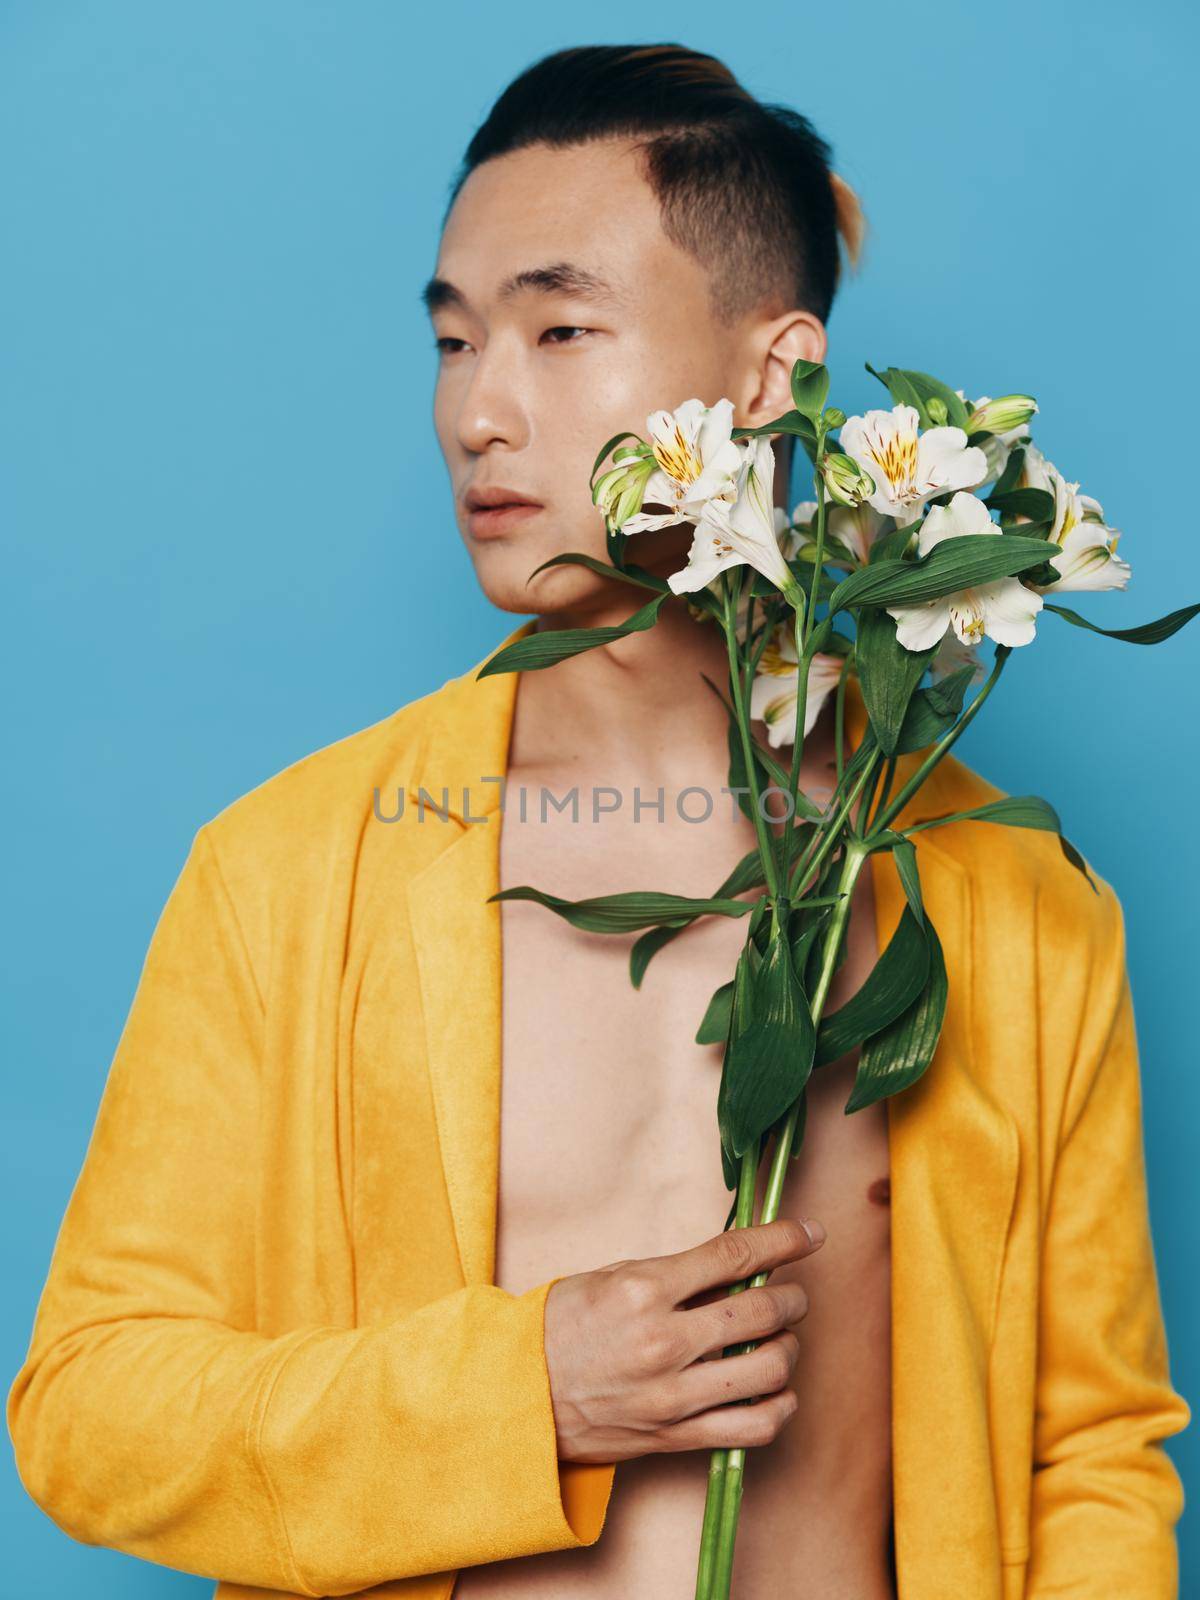 man with bouquet of white flowers on blue background and yellow coat cropped view by SHOTPRIME